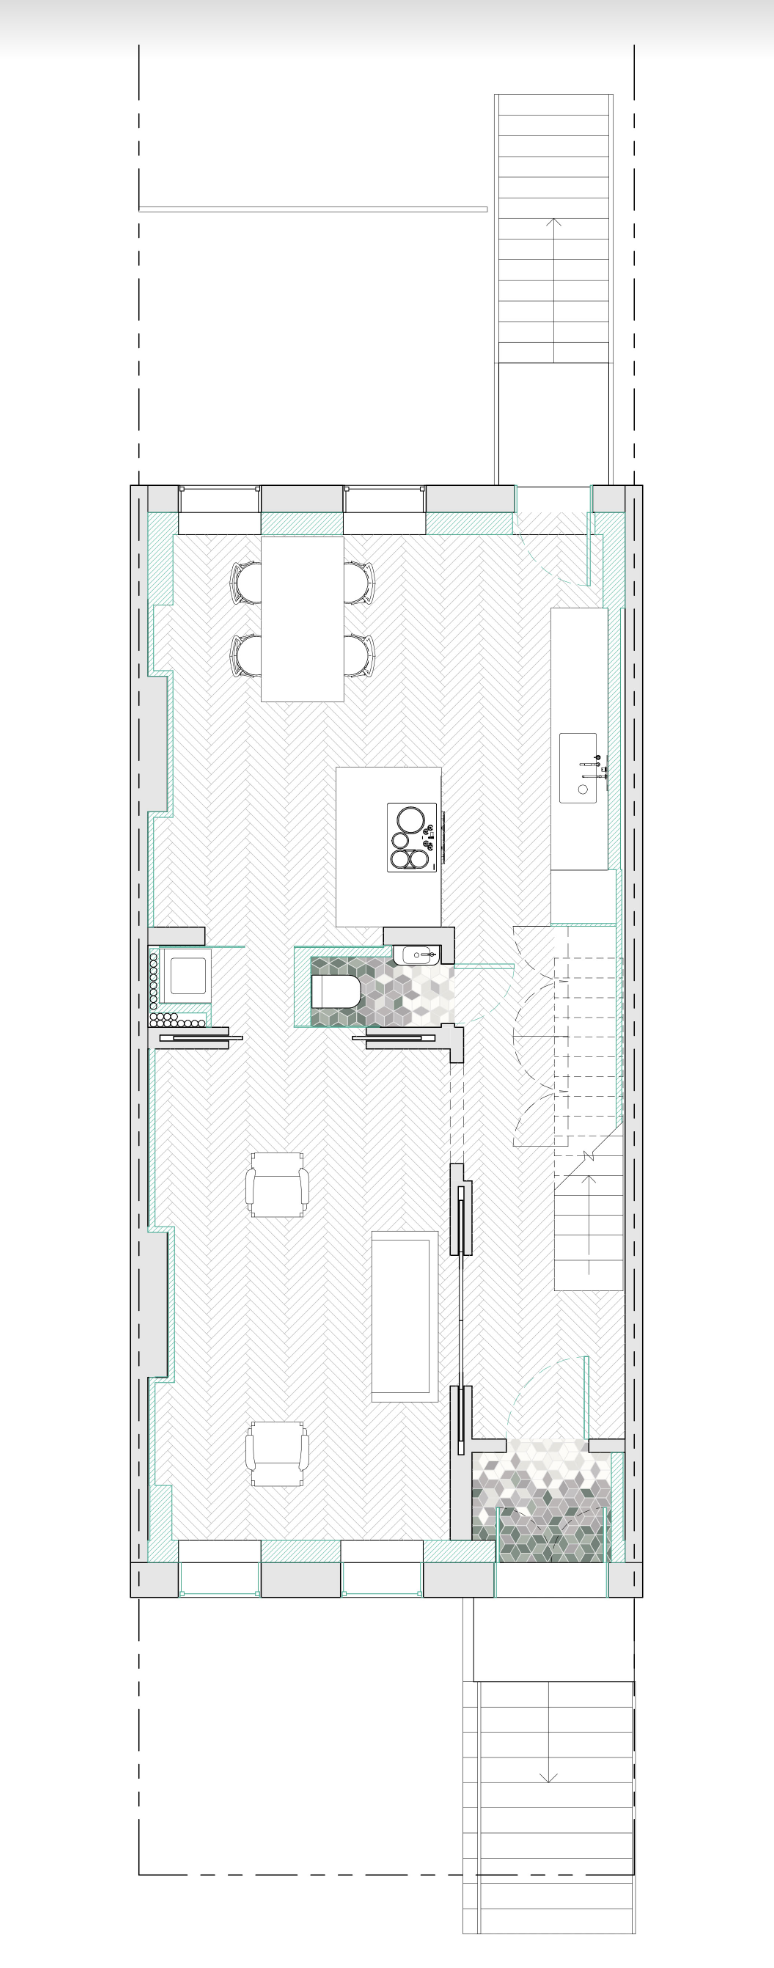 Floor plan CO Adaptive architecture Bed Stuy townhouse parlor floor.